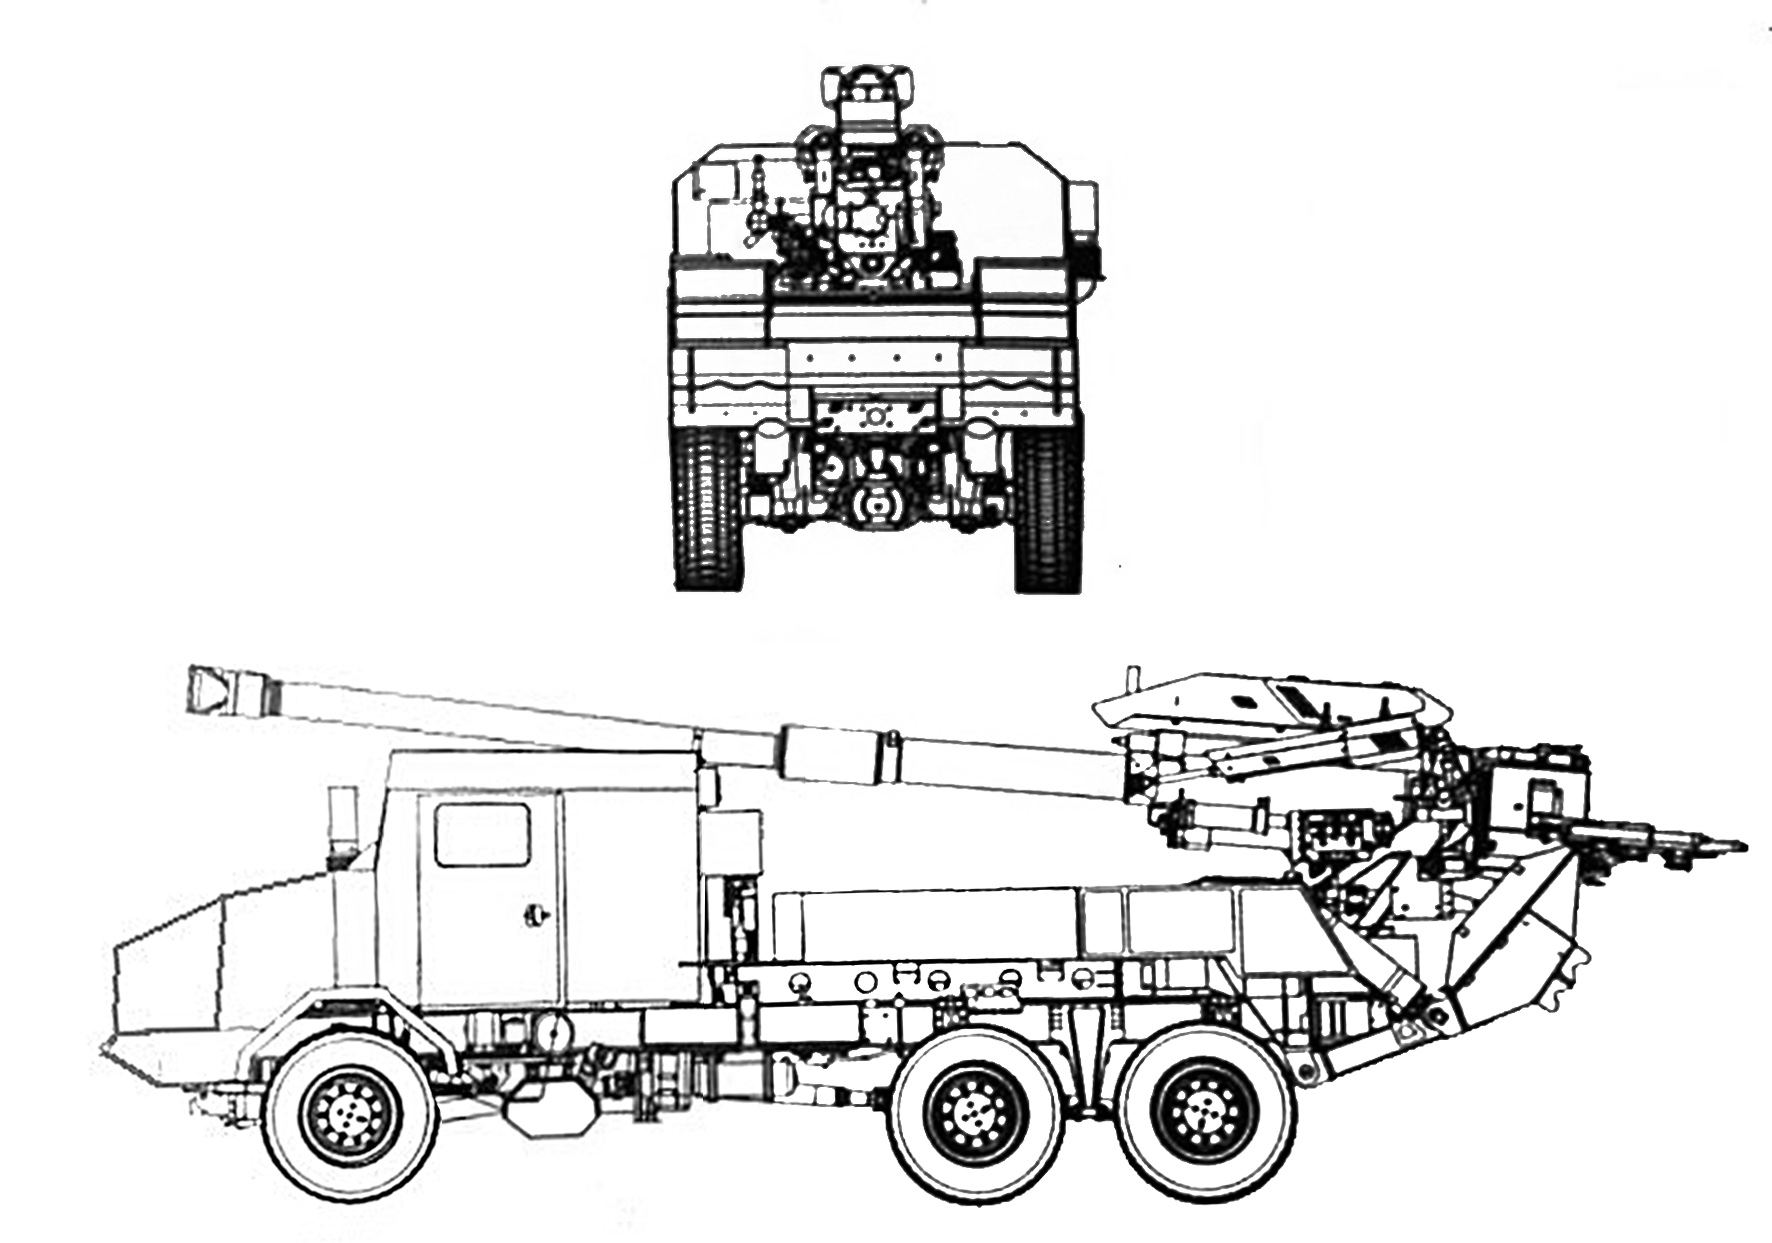 Kryl_155mm_6x6_self-propelled_howitzer_Jelcz_truck_chassis_HSW_Polaand_Polish_defense_industry_line_drawing_blueprint_001.jpg